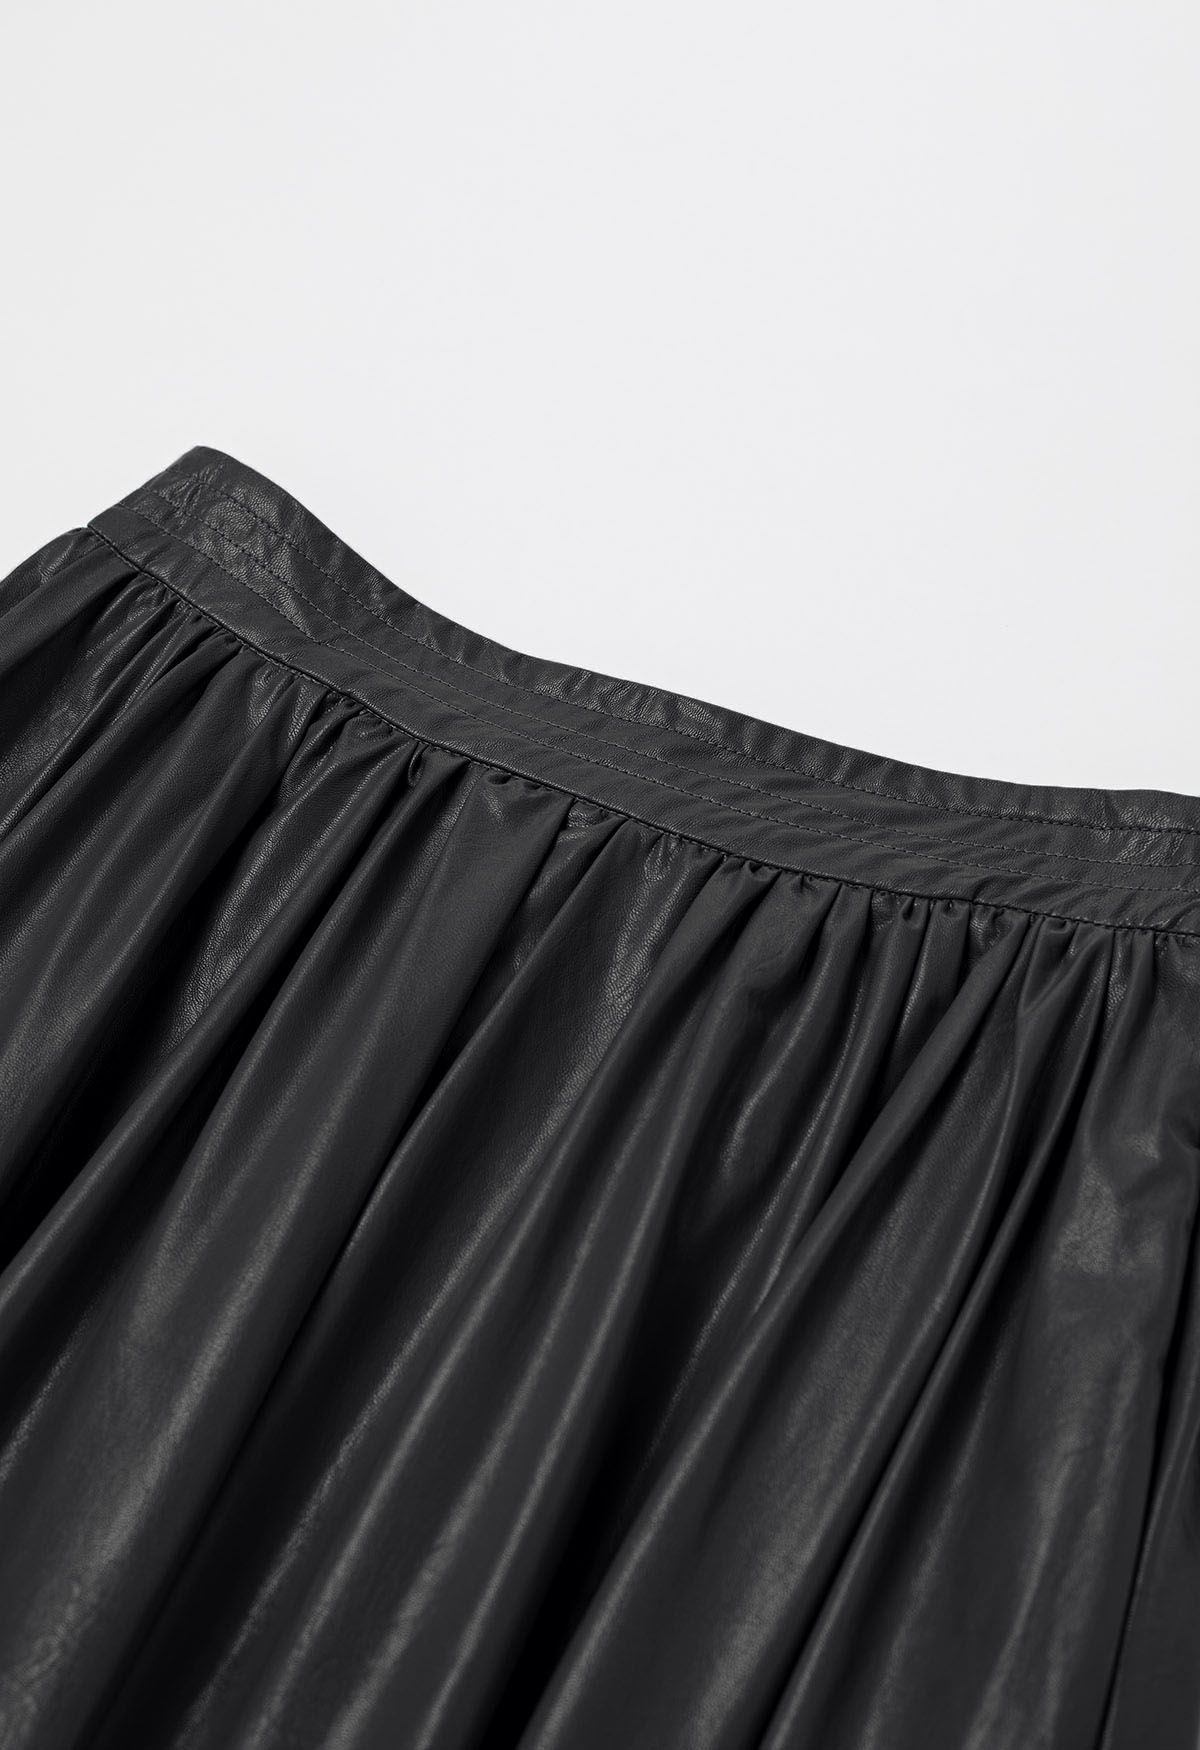 Refined Simplicity Faux Leather Maxi Skirt in Black